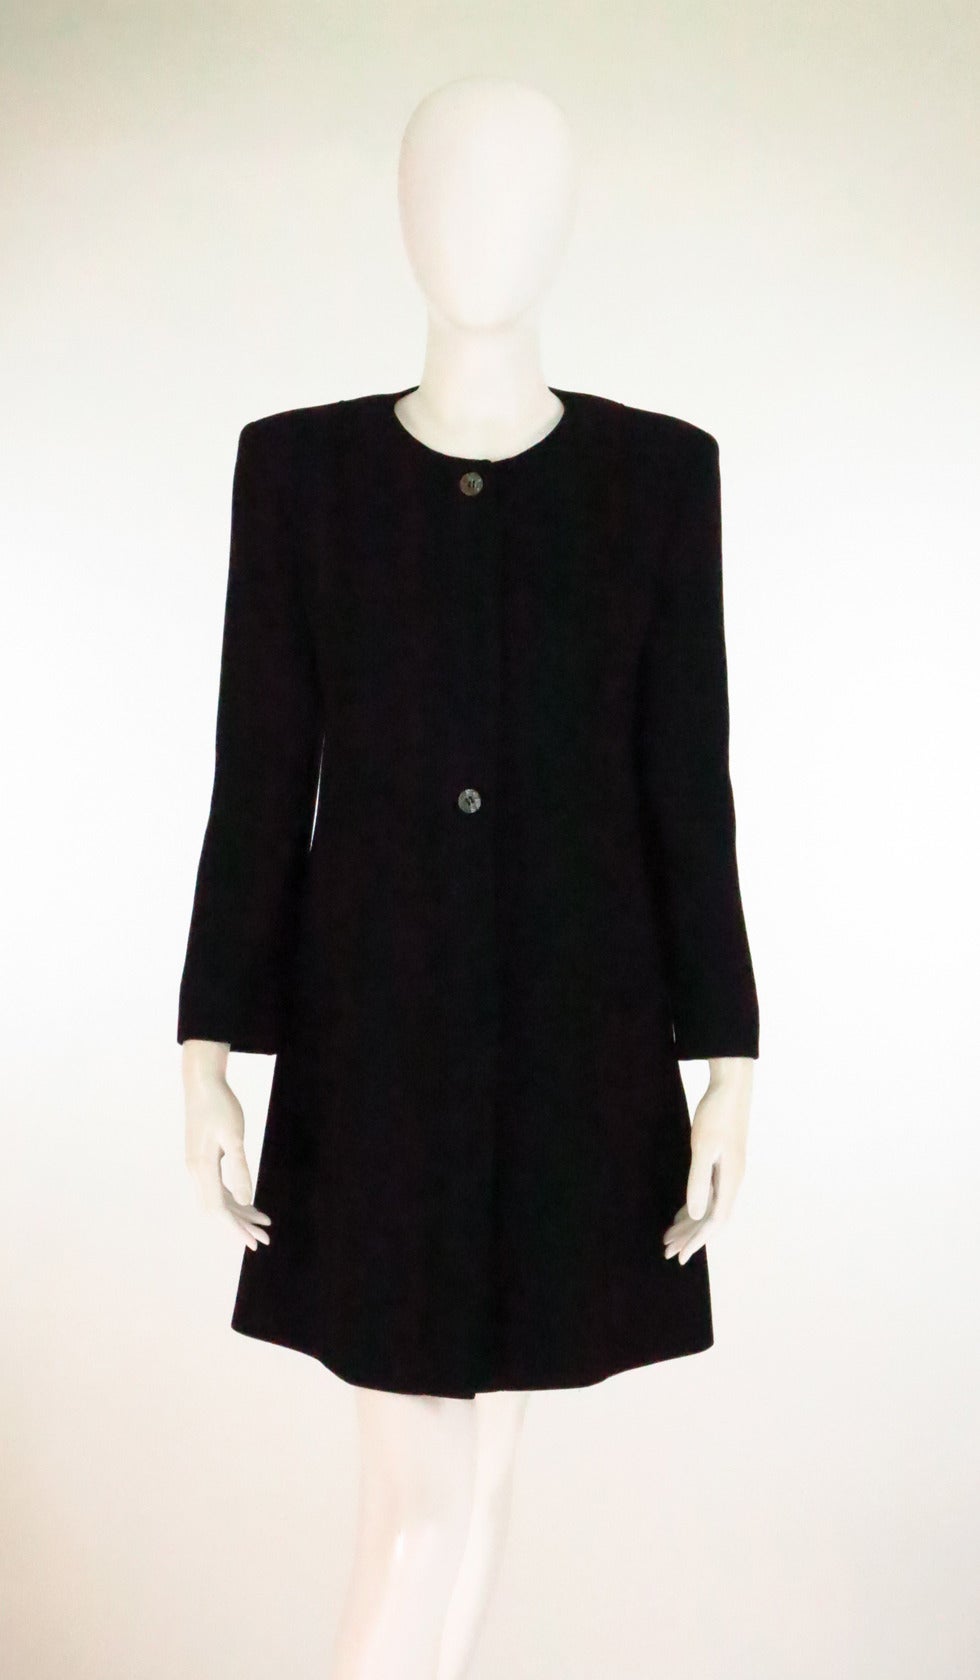 Fendi Black wool reversed seam collarless coat...Simple style, this coat looks great with trousers, jeans or skirts...Fitted A line coat has a jewel neckline, hidden dark mother of pearl button, placket front coat, with decorative reverse seaming at